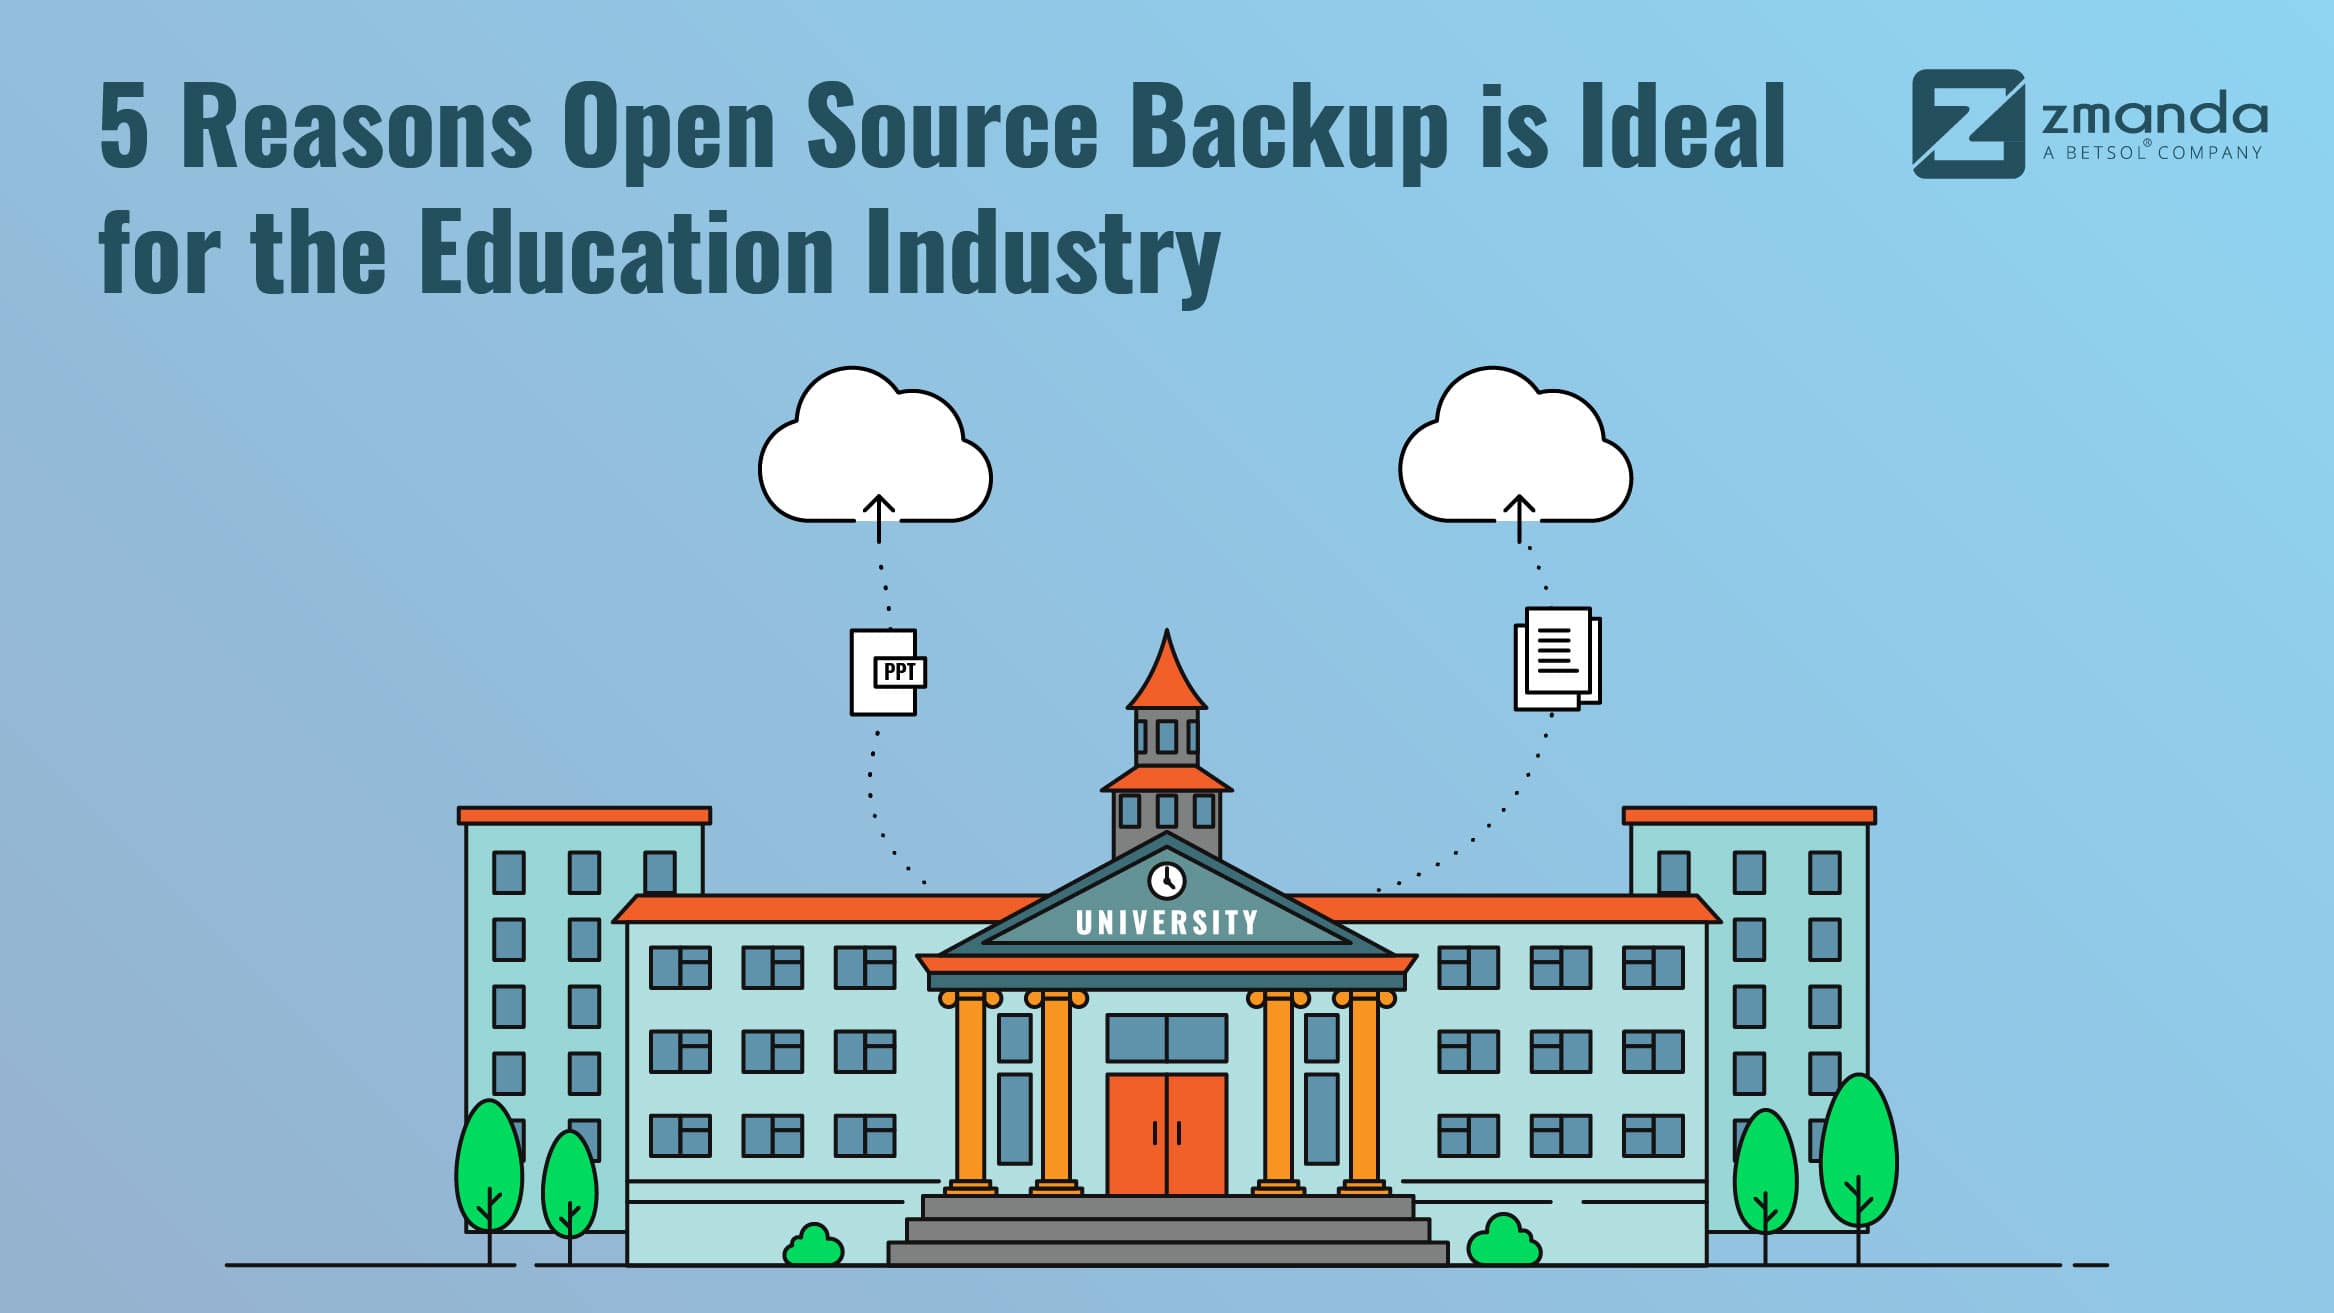 Why open source backup is ideal for the education industry